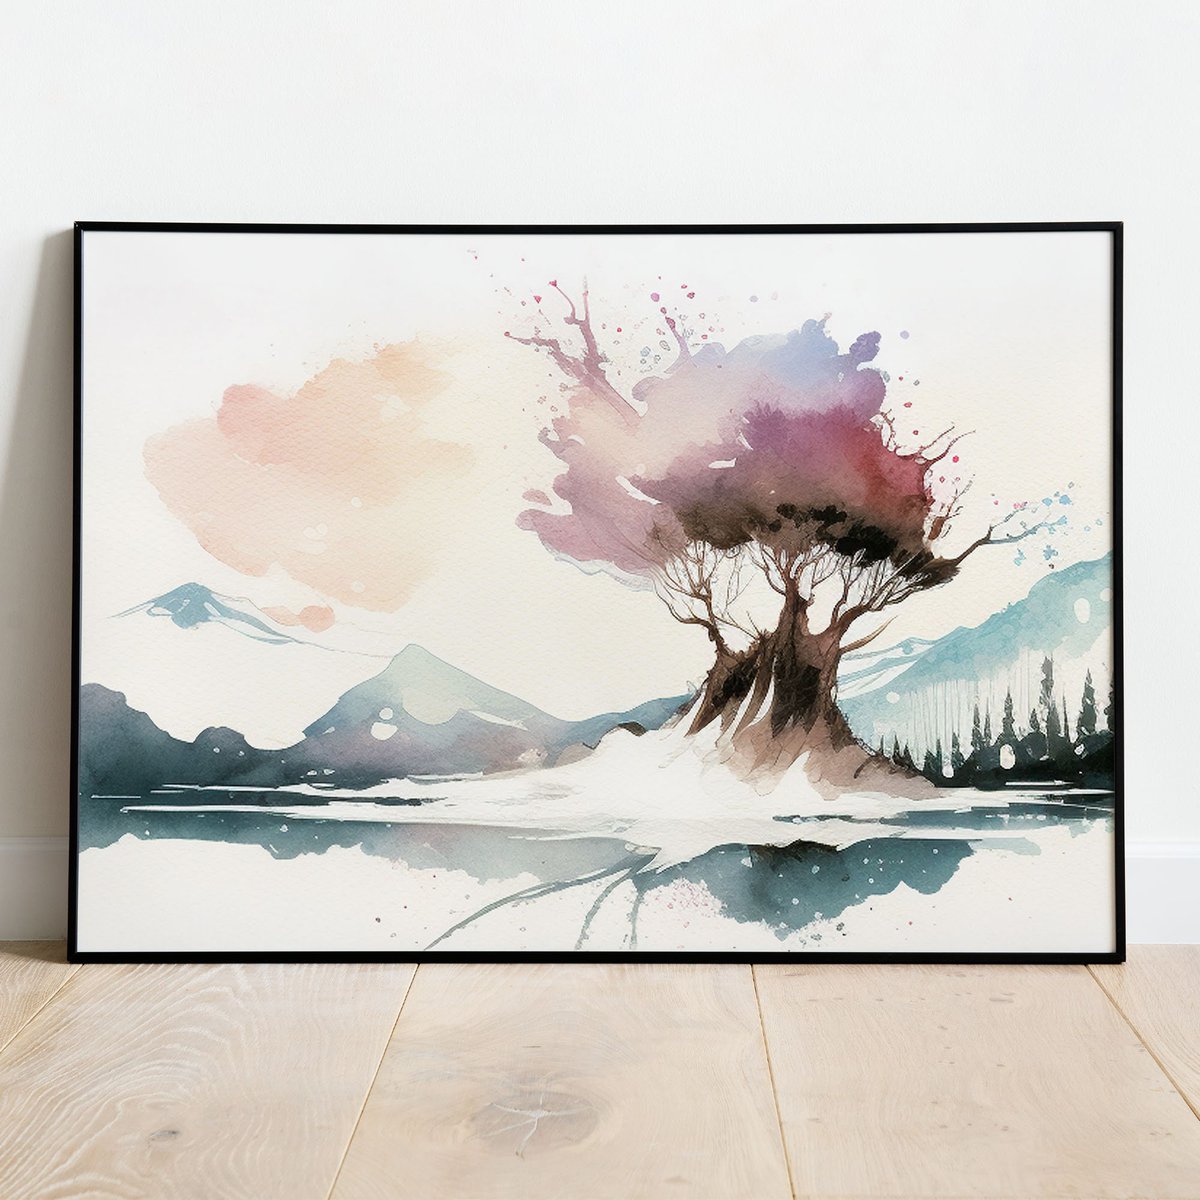 Watercolor Palette Landscape Painting Art Digital Products
etsy.me/3EvaOAa 
#Watercolor #LandscapeArt #WatercolorPrint #WatercolorLandscape #LandscapePrint #WatercolorPaints #WatercolorArt